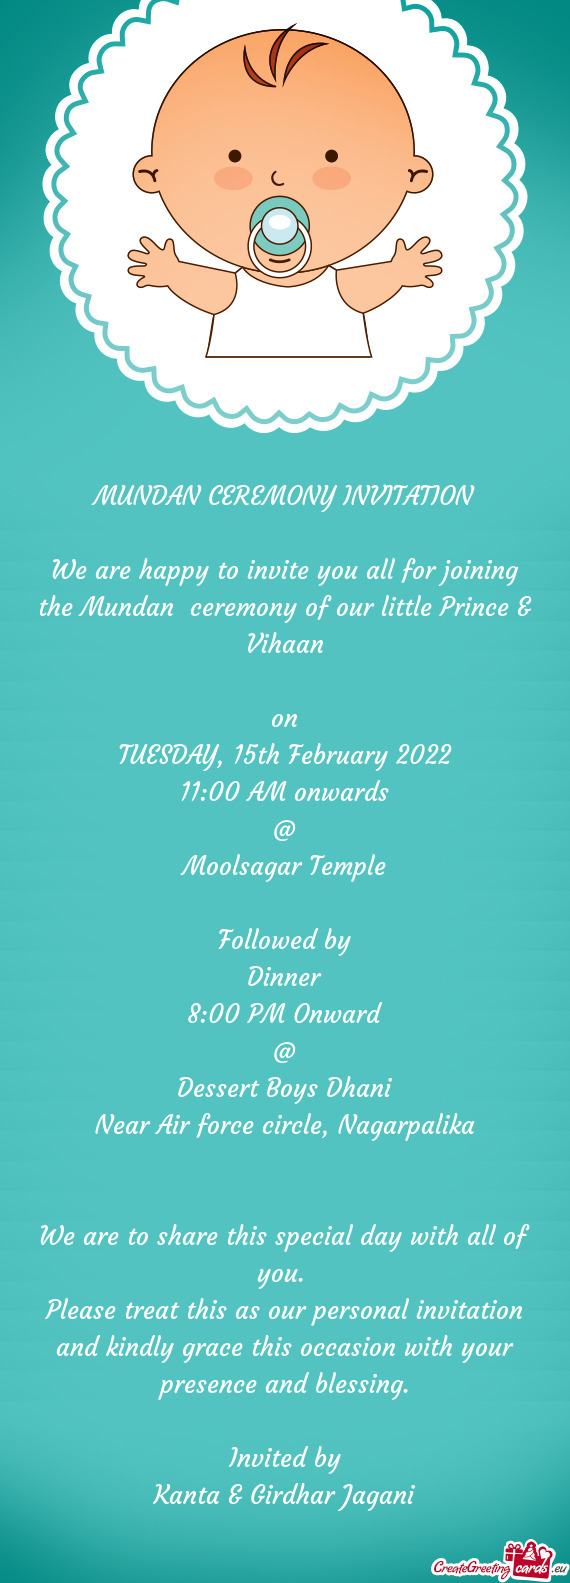 We are happy to invite you all for joining the Mundan ceremony of our little Prince & Vihaan